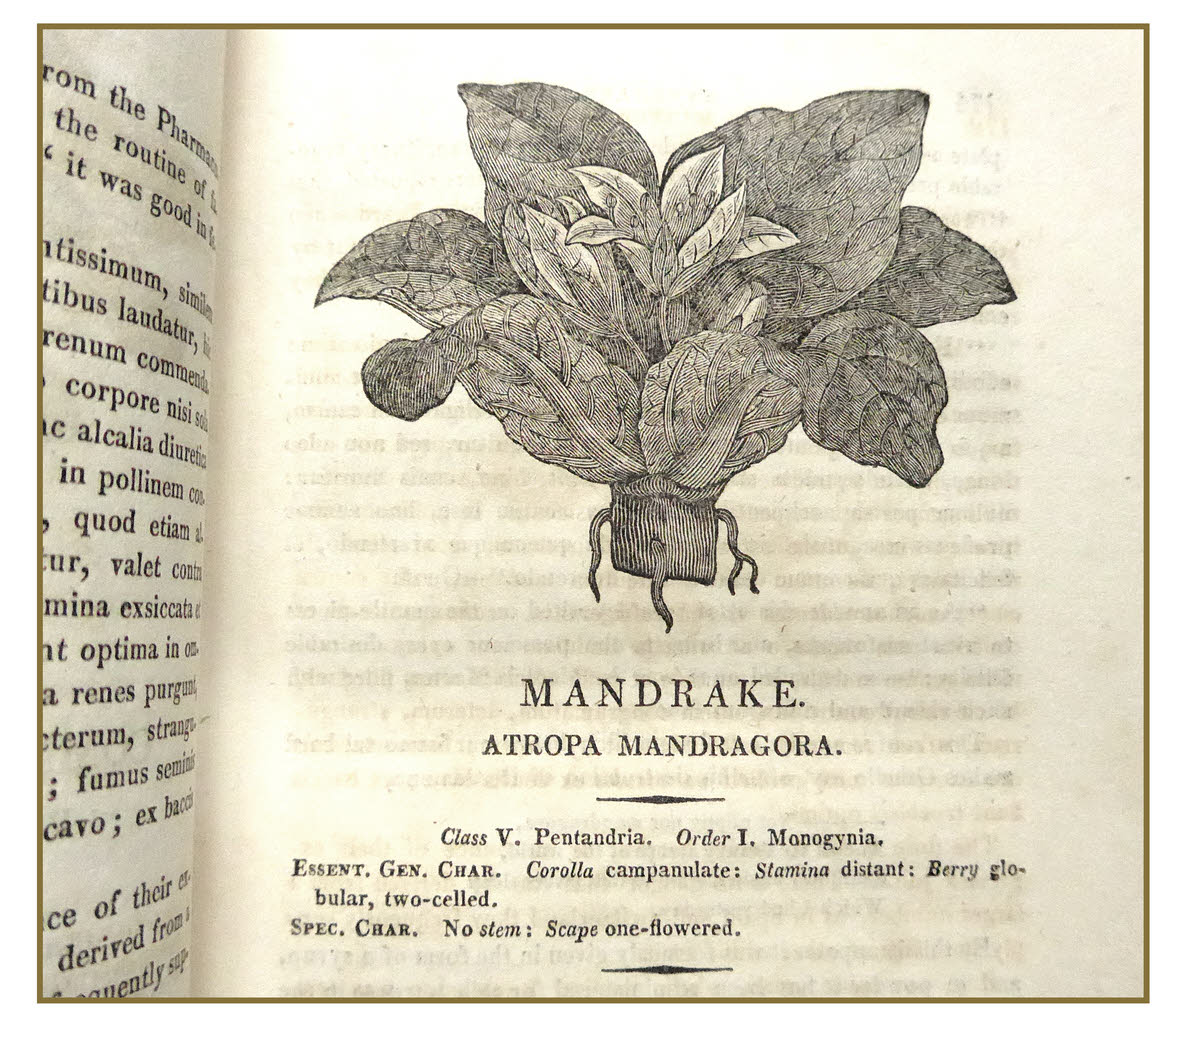 Illustration of mandrake by Bewick in Thornton's Herbal